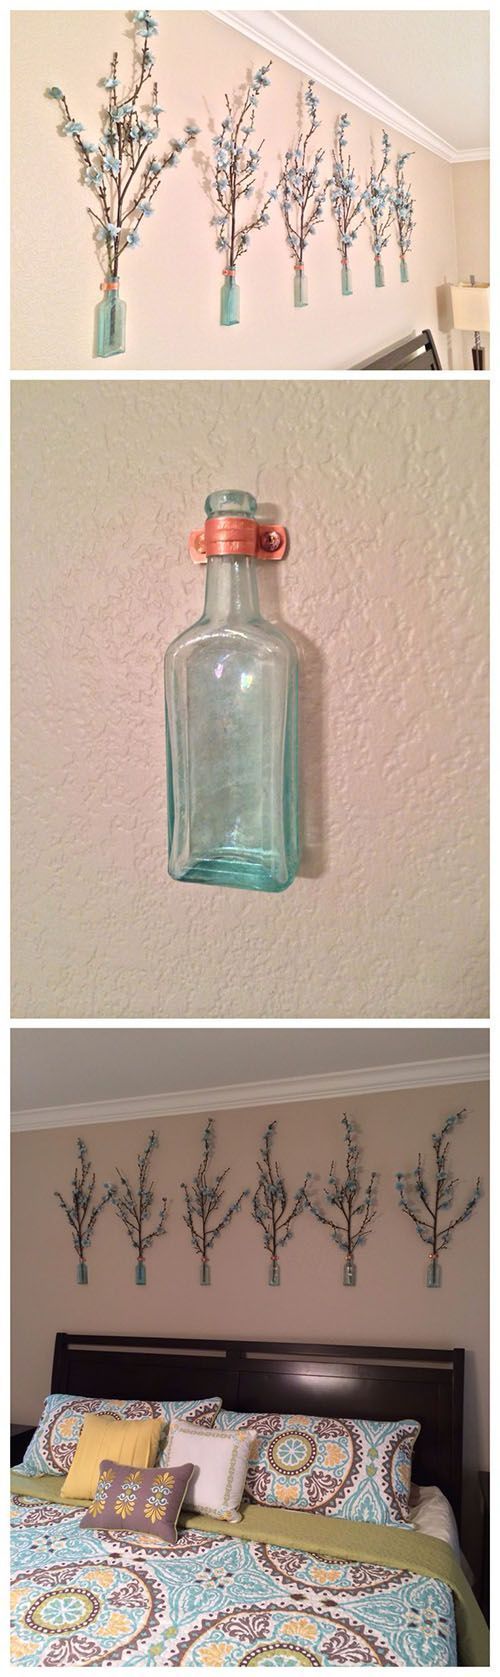 22 Great DIY And Wall Decor Ideas Part 1 | Inspired Snaps